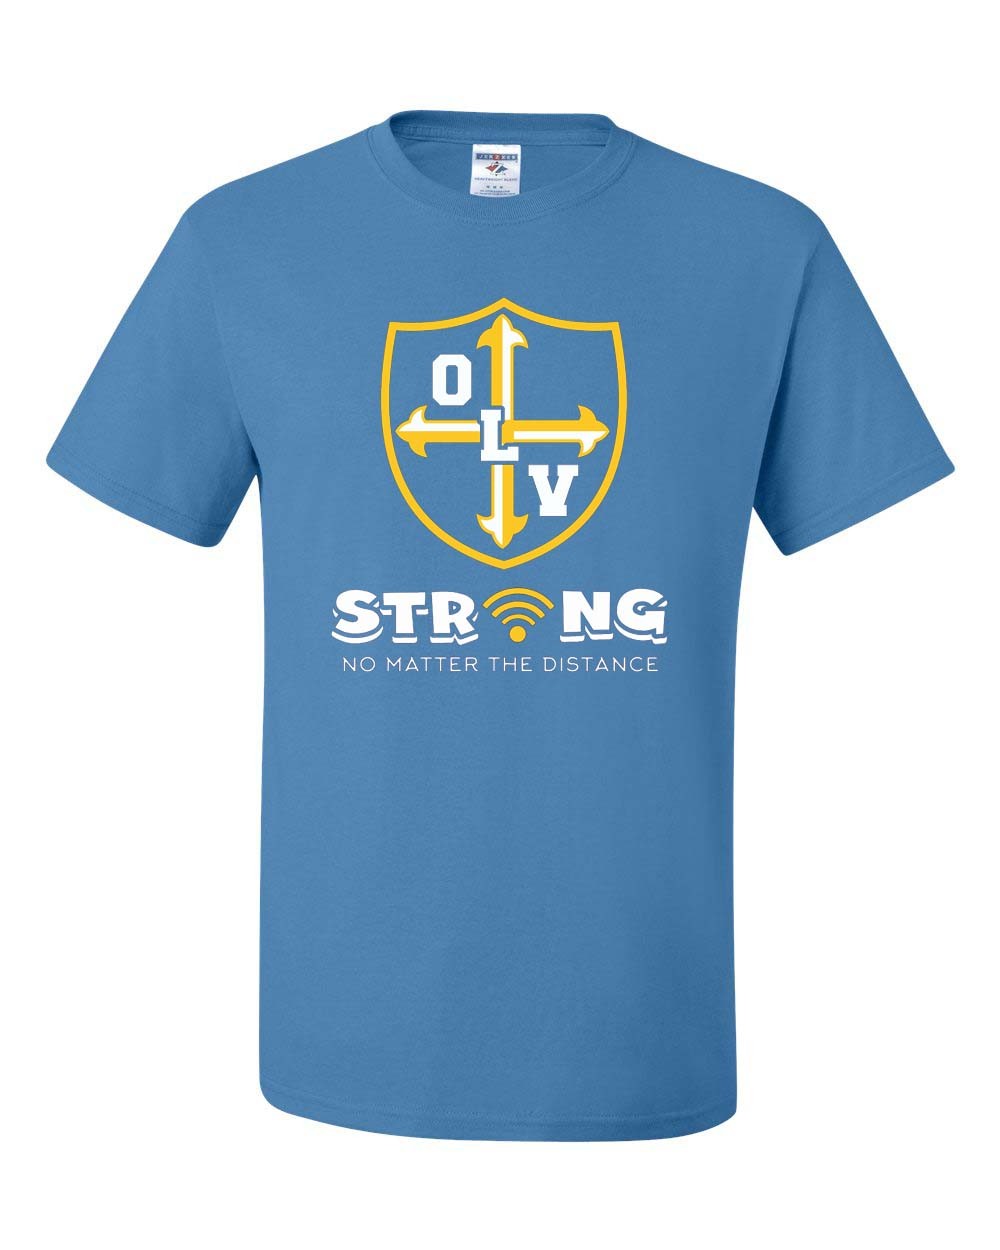 OLV S/S Spirit T-Shirt w/ Strong Logo - Please Allow 2-3 Weeks for Delivery